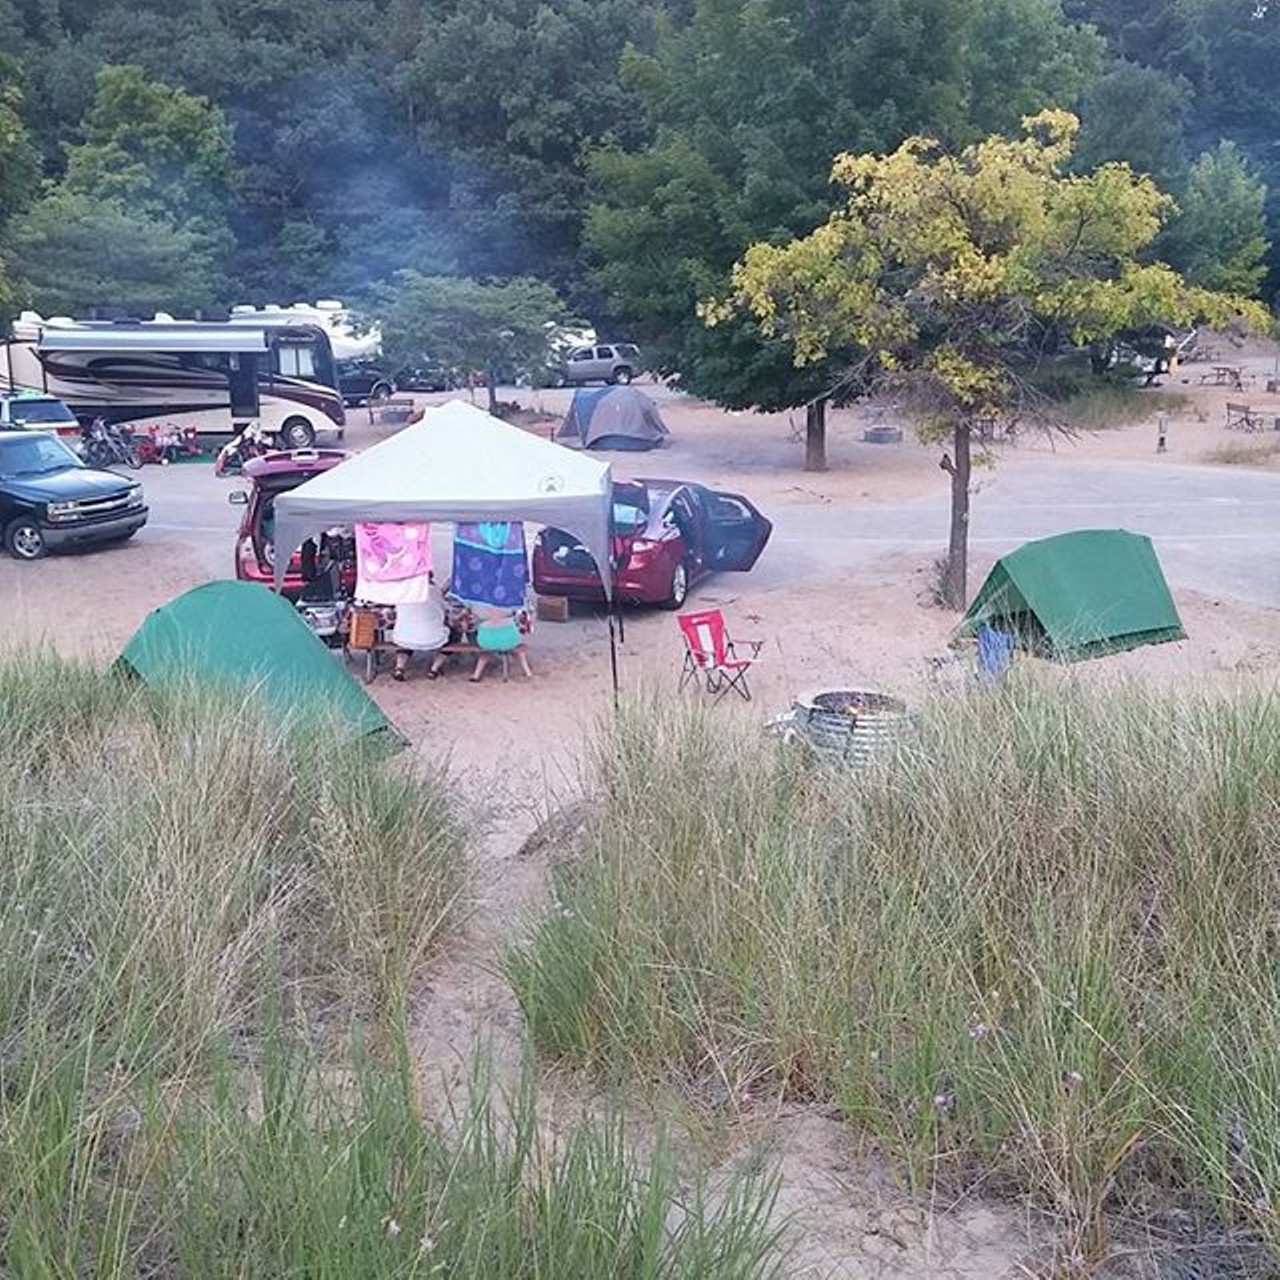 Mears State Park400 West Lowell Street, Pentwater MI, 49449 | 231-869-2051Located in the quaint village of Pentwater along the Lake Michigan shoreline, this campground's paved campsite lots are surrounded by fine sand and a swimming beach is adjacent to the harbor pier. (Photo via Instagram user @triumphdude)